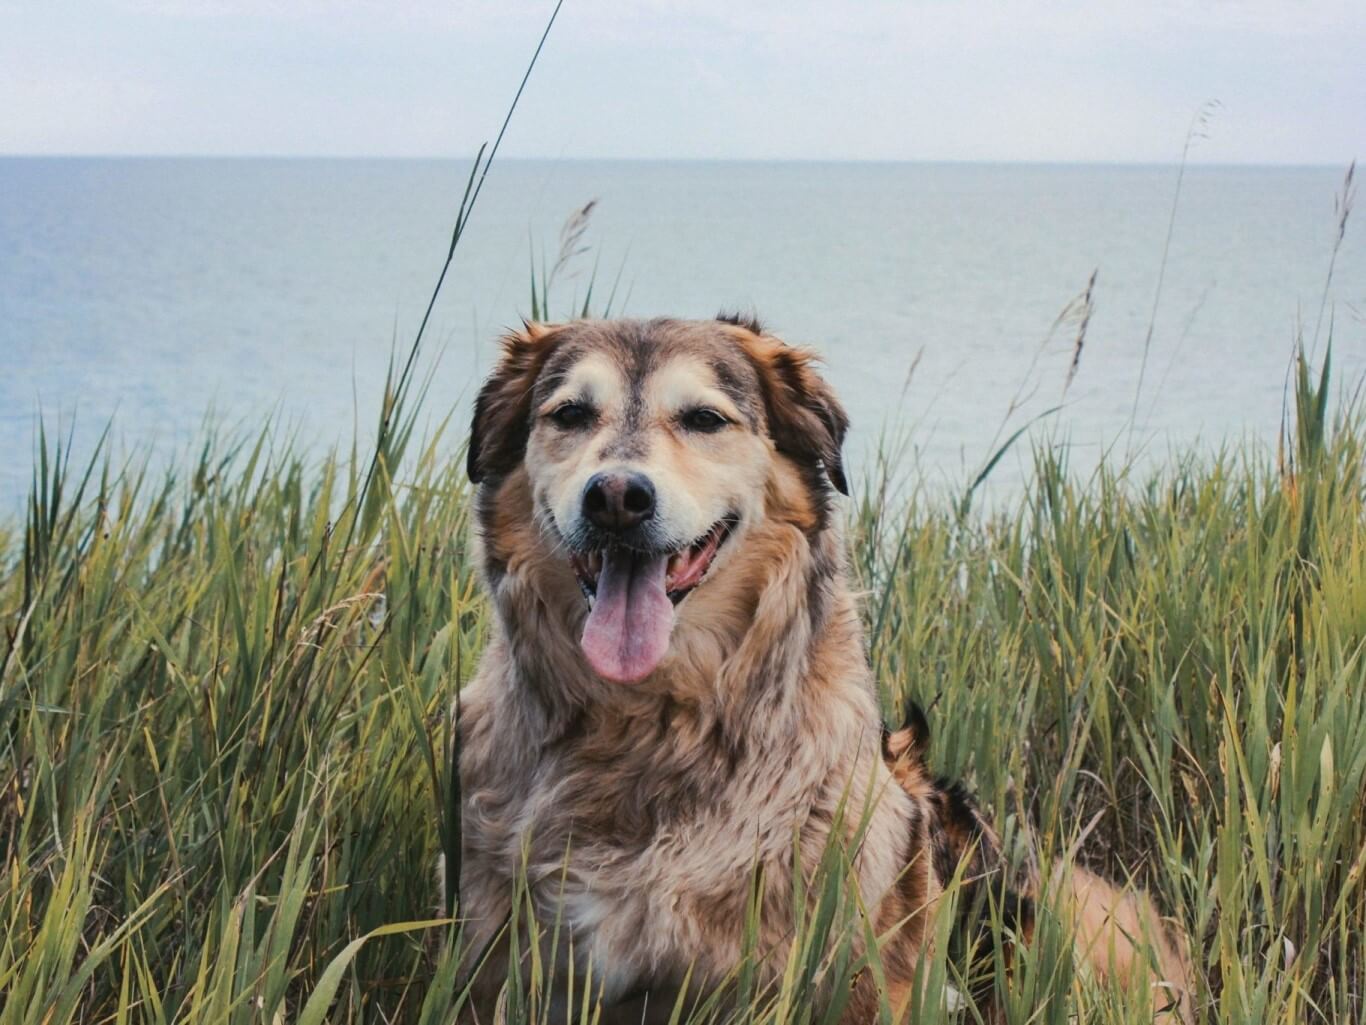 Dog sat in sand dunes in front of the sea